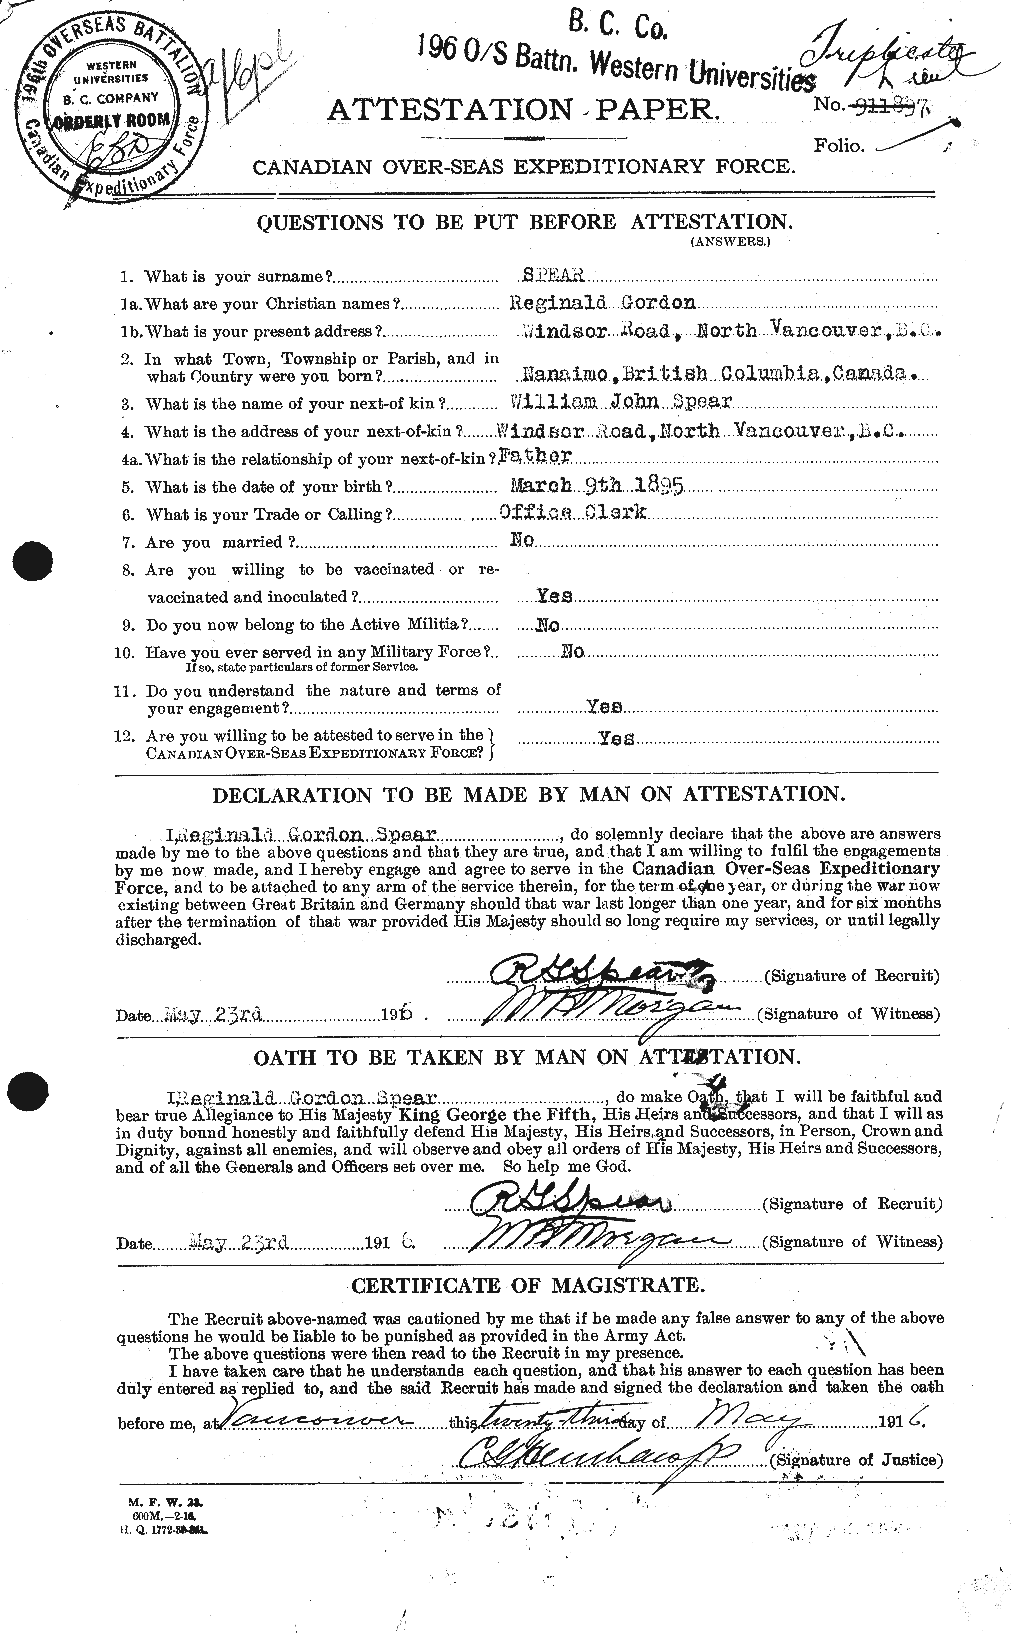 Personnel Records of the First World War - CEF 110827a